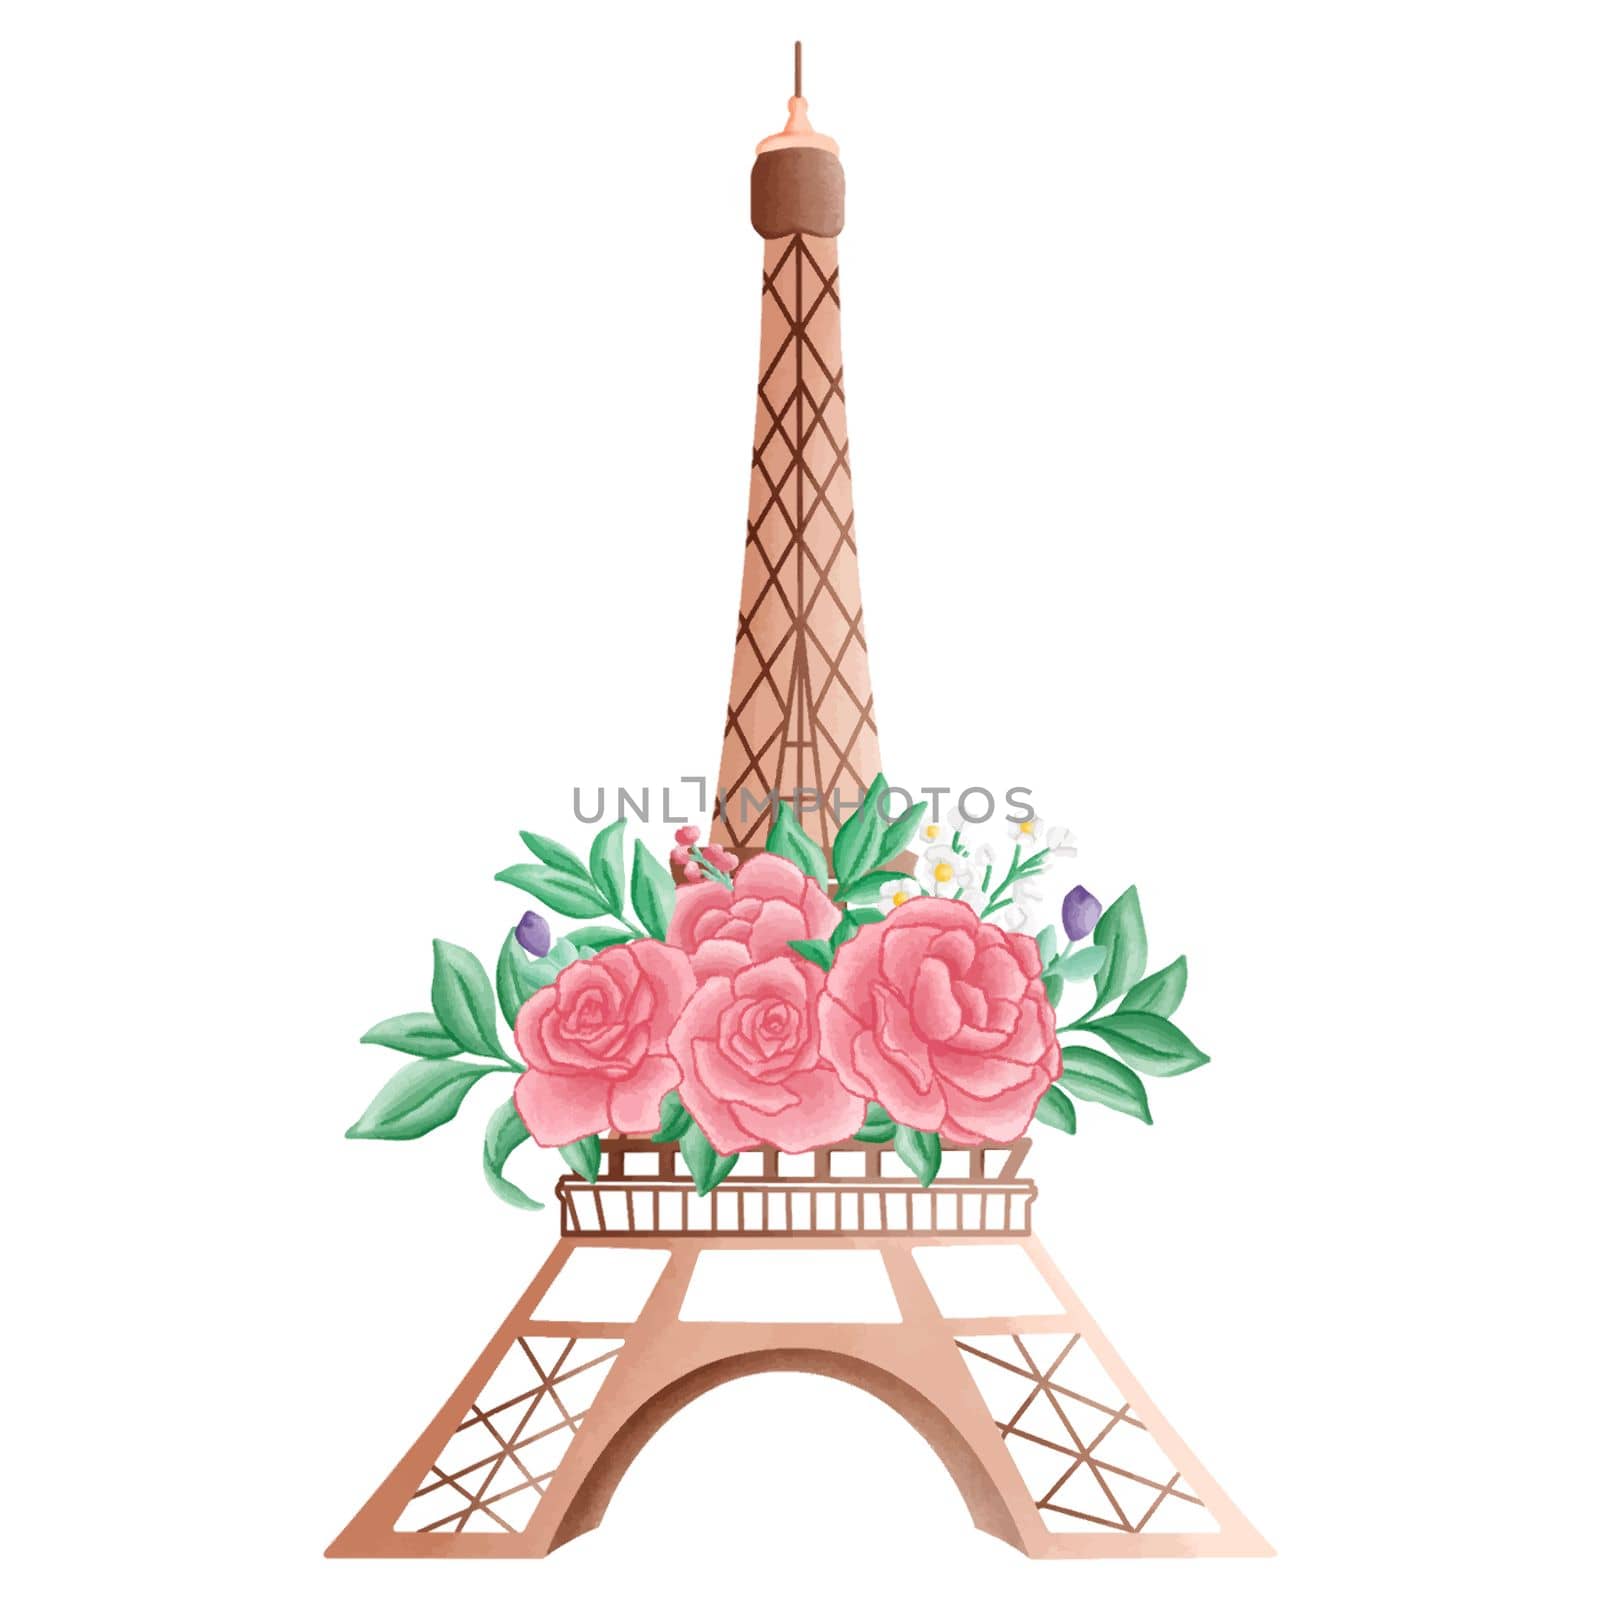 Romantic Eifffel Tower Watercolor Clipart PNG . Paris In Love with lovely pastel Eiffel Tower with roses flowers for romantic design element, love art, wedding watercolor illustration.